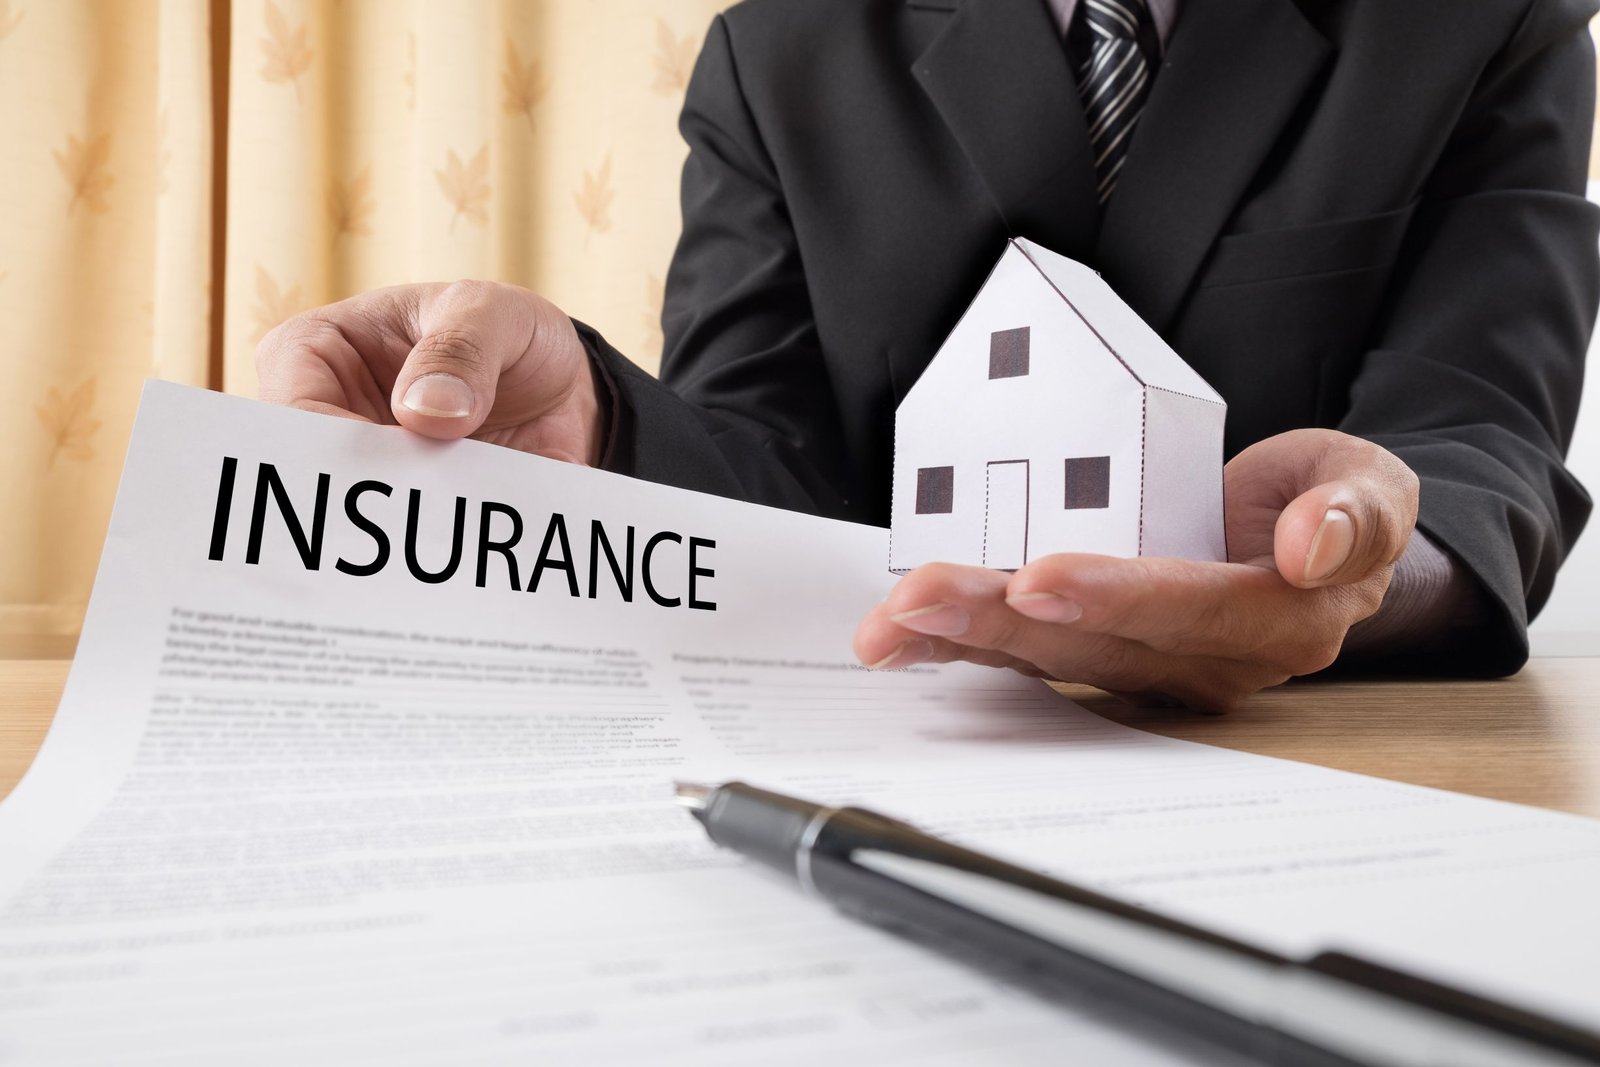 6 Insider Tips for Selecting the Right Construction Insurance